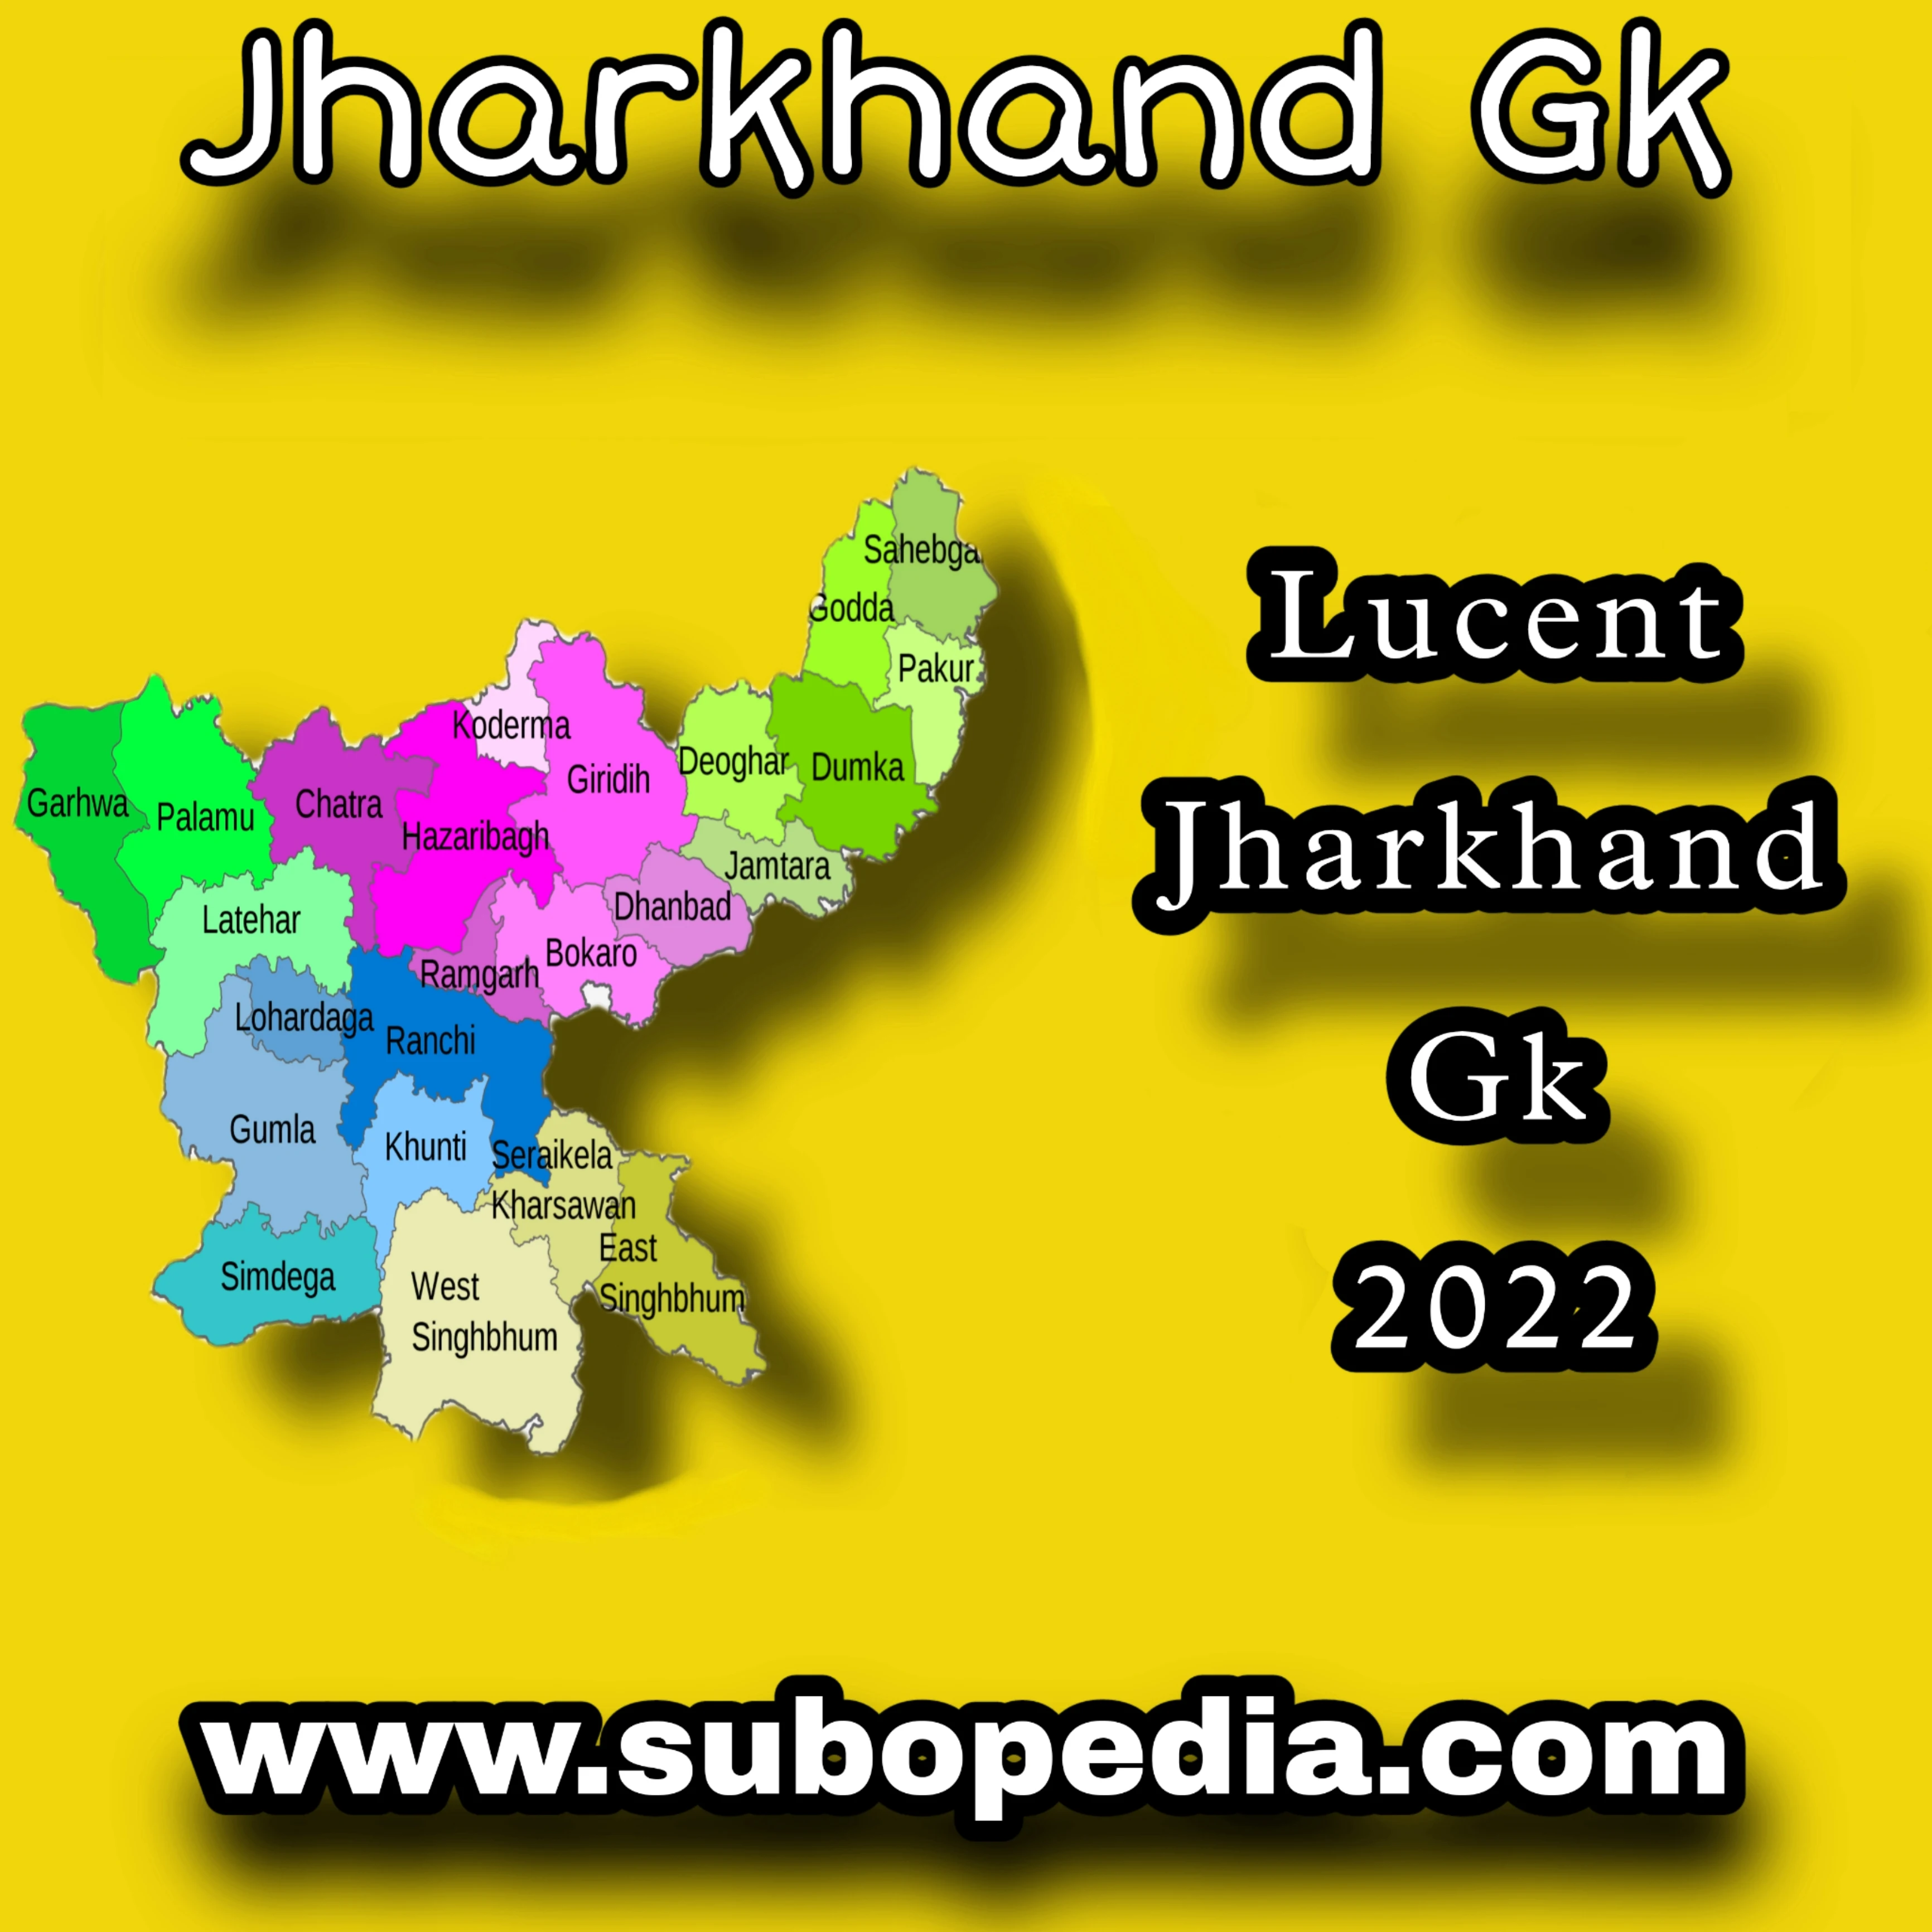 Lucent Jharkhand General Knowledge